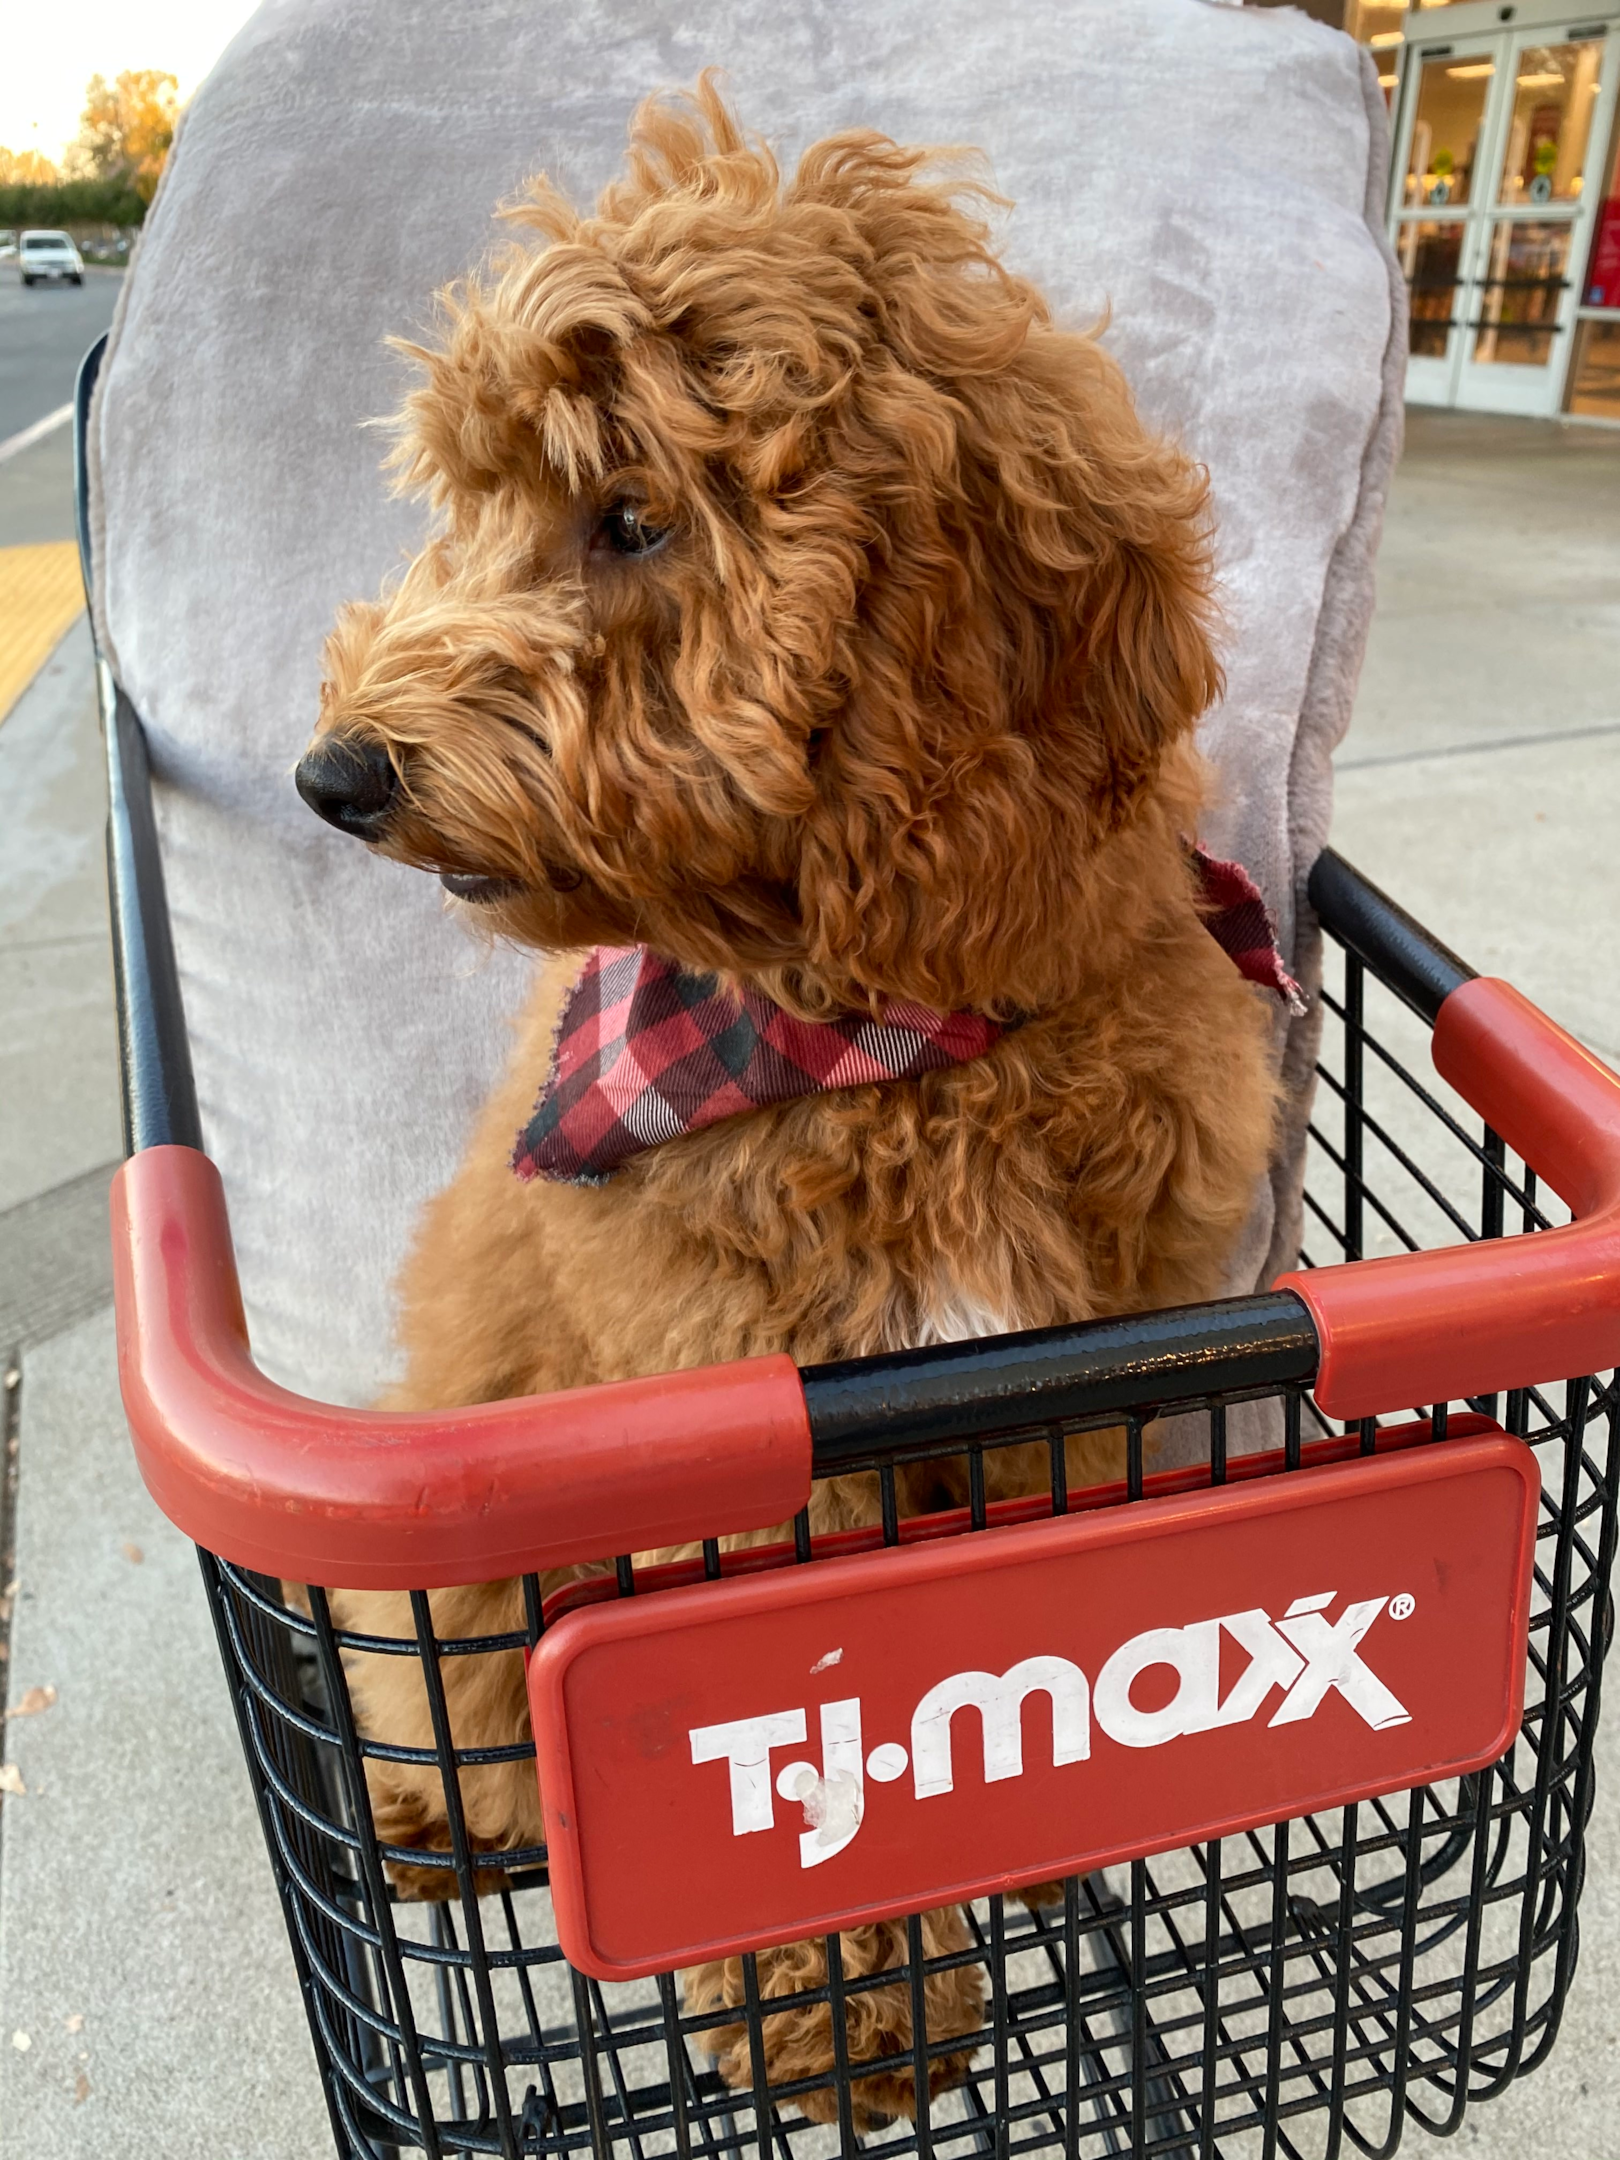 Image showing a dog in a TJ Maxx shopping cart. 